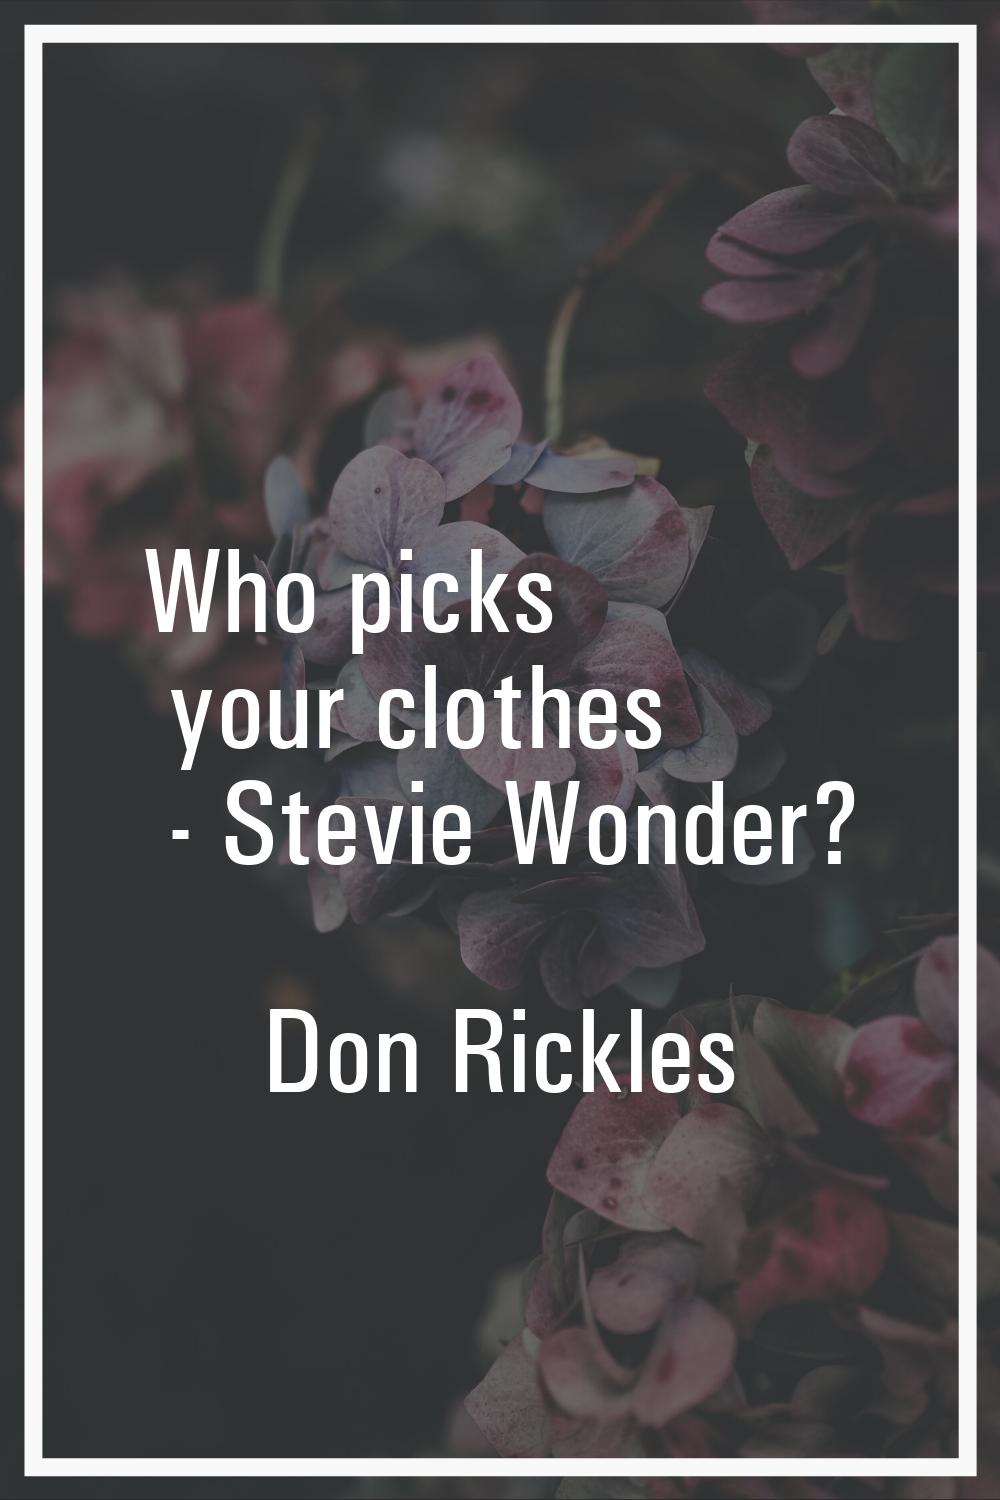 Who picks your clothes - Stevie Wonder?